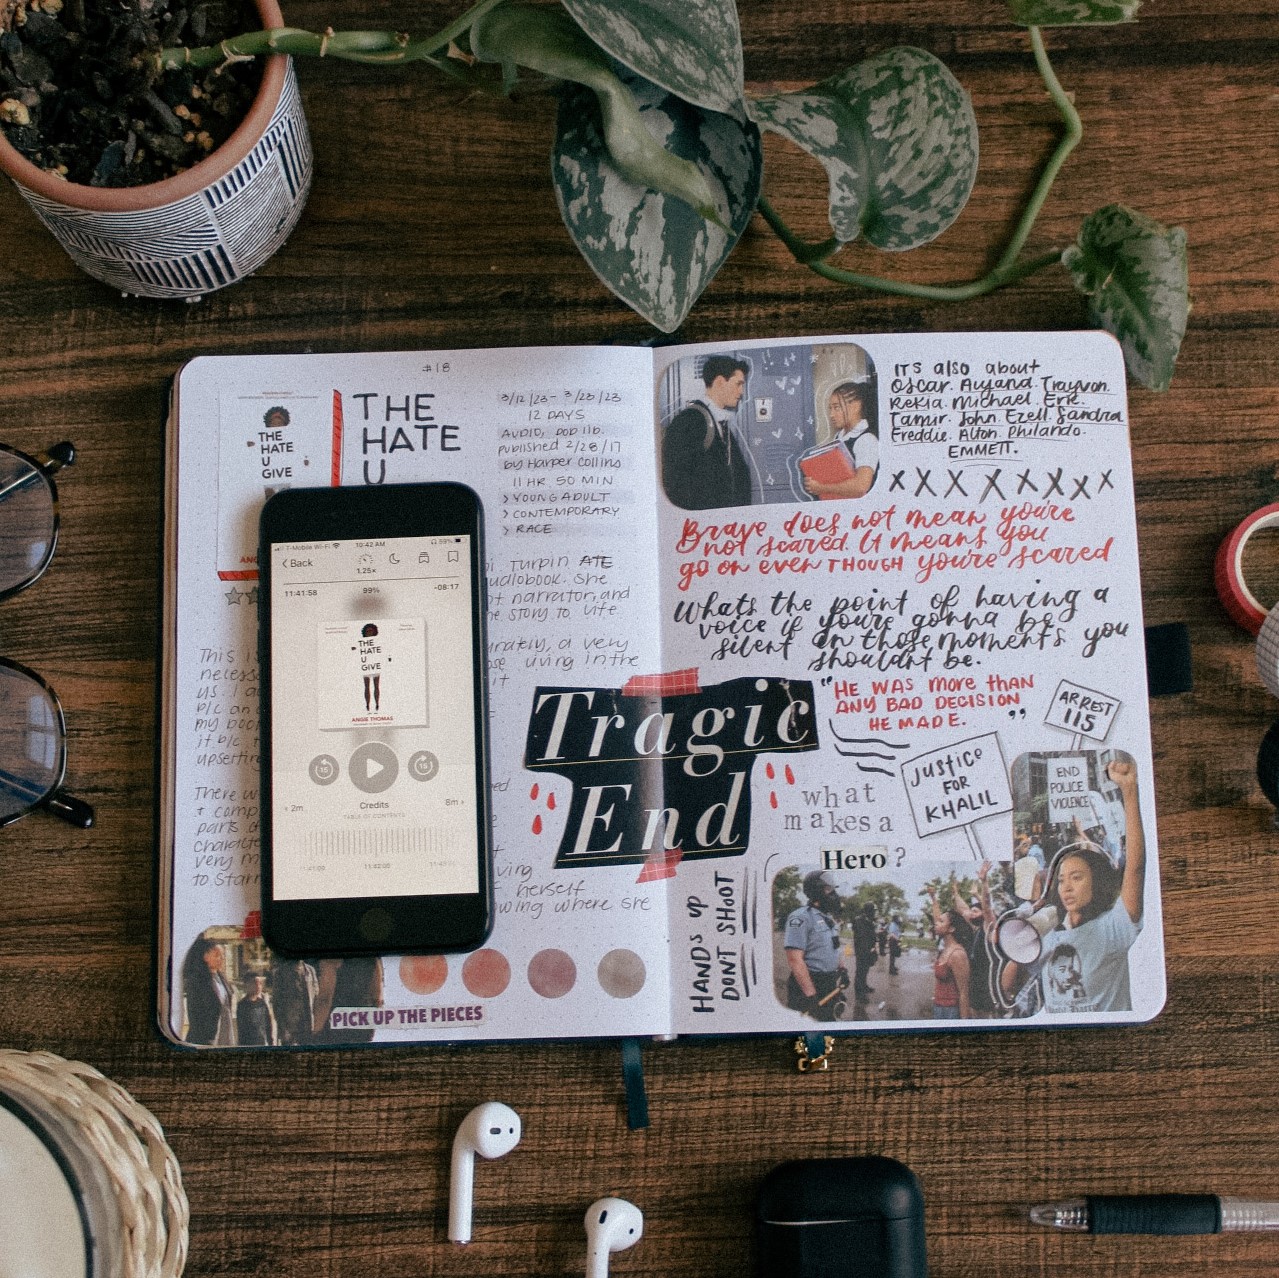 A flat-lay photo of the book The Hate U Give by Angie Thomas. The book is lying on a reading journal book review spread for the book. On the table around it are plants and stationery elements.